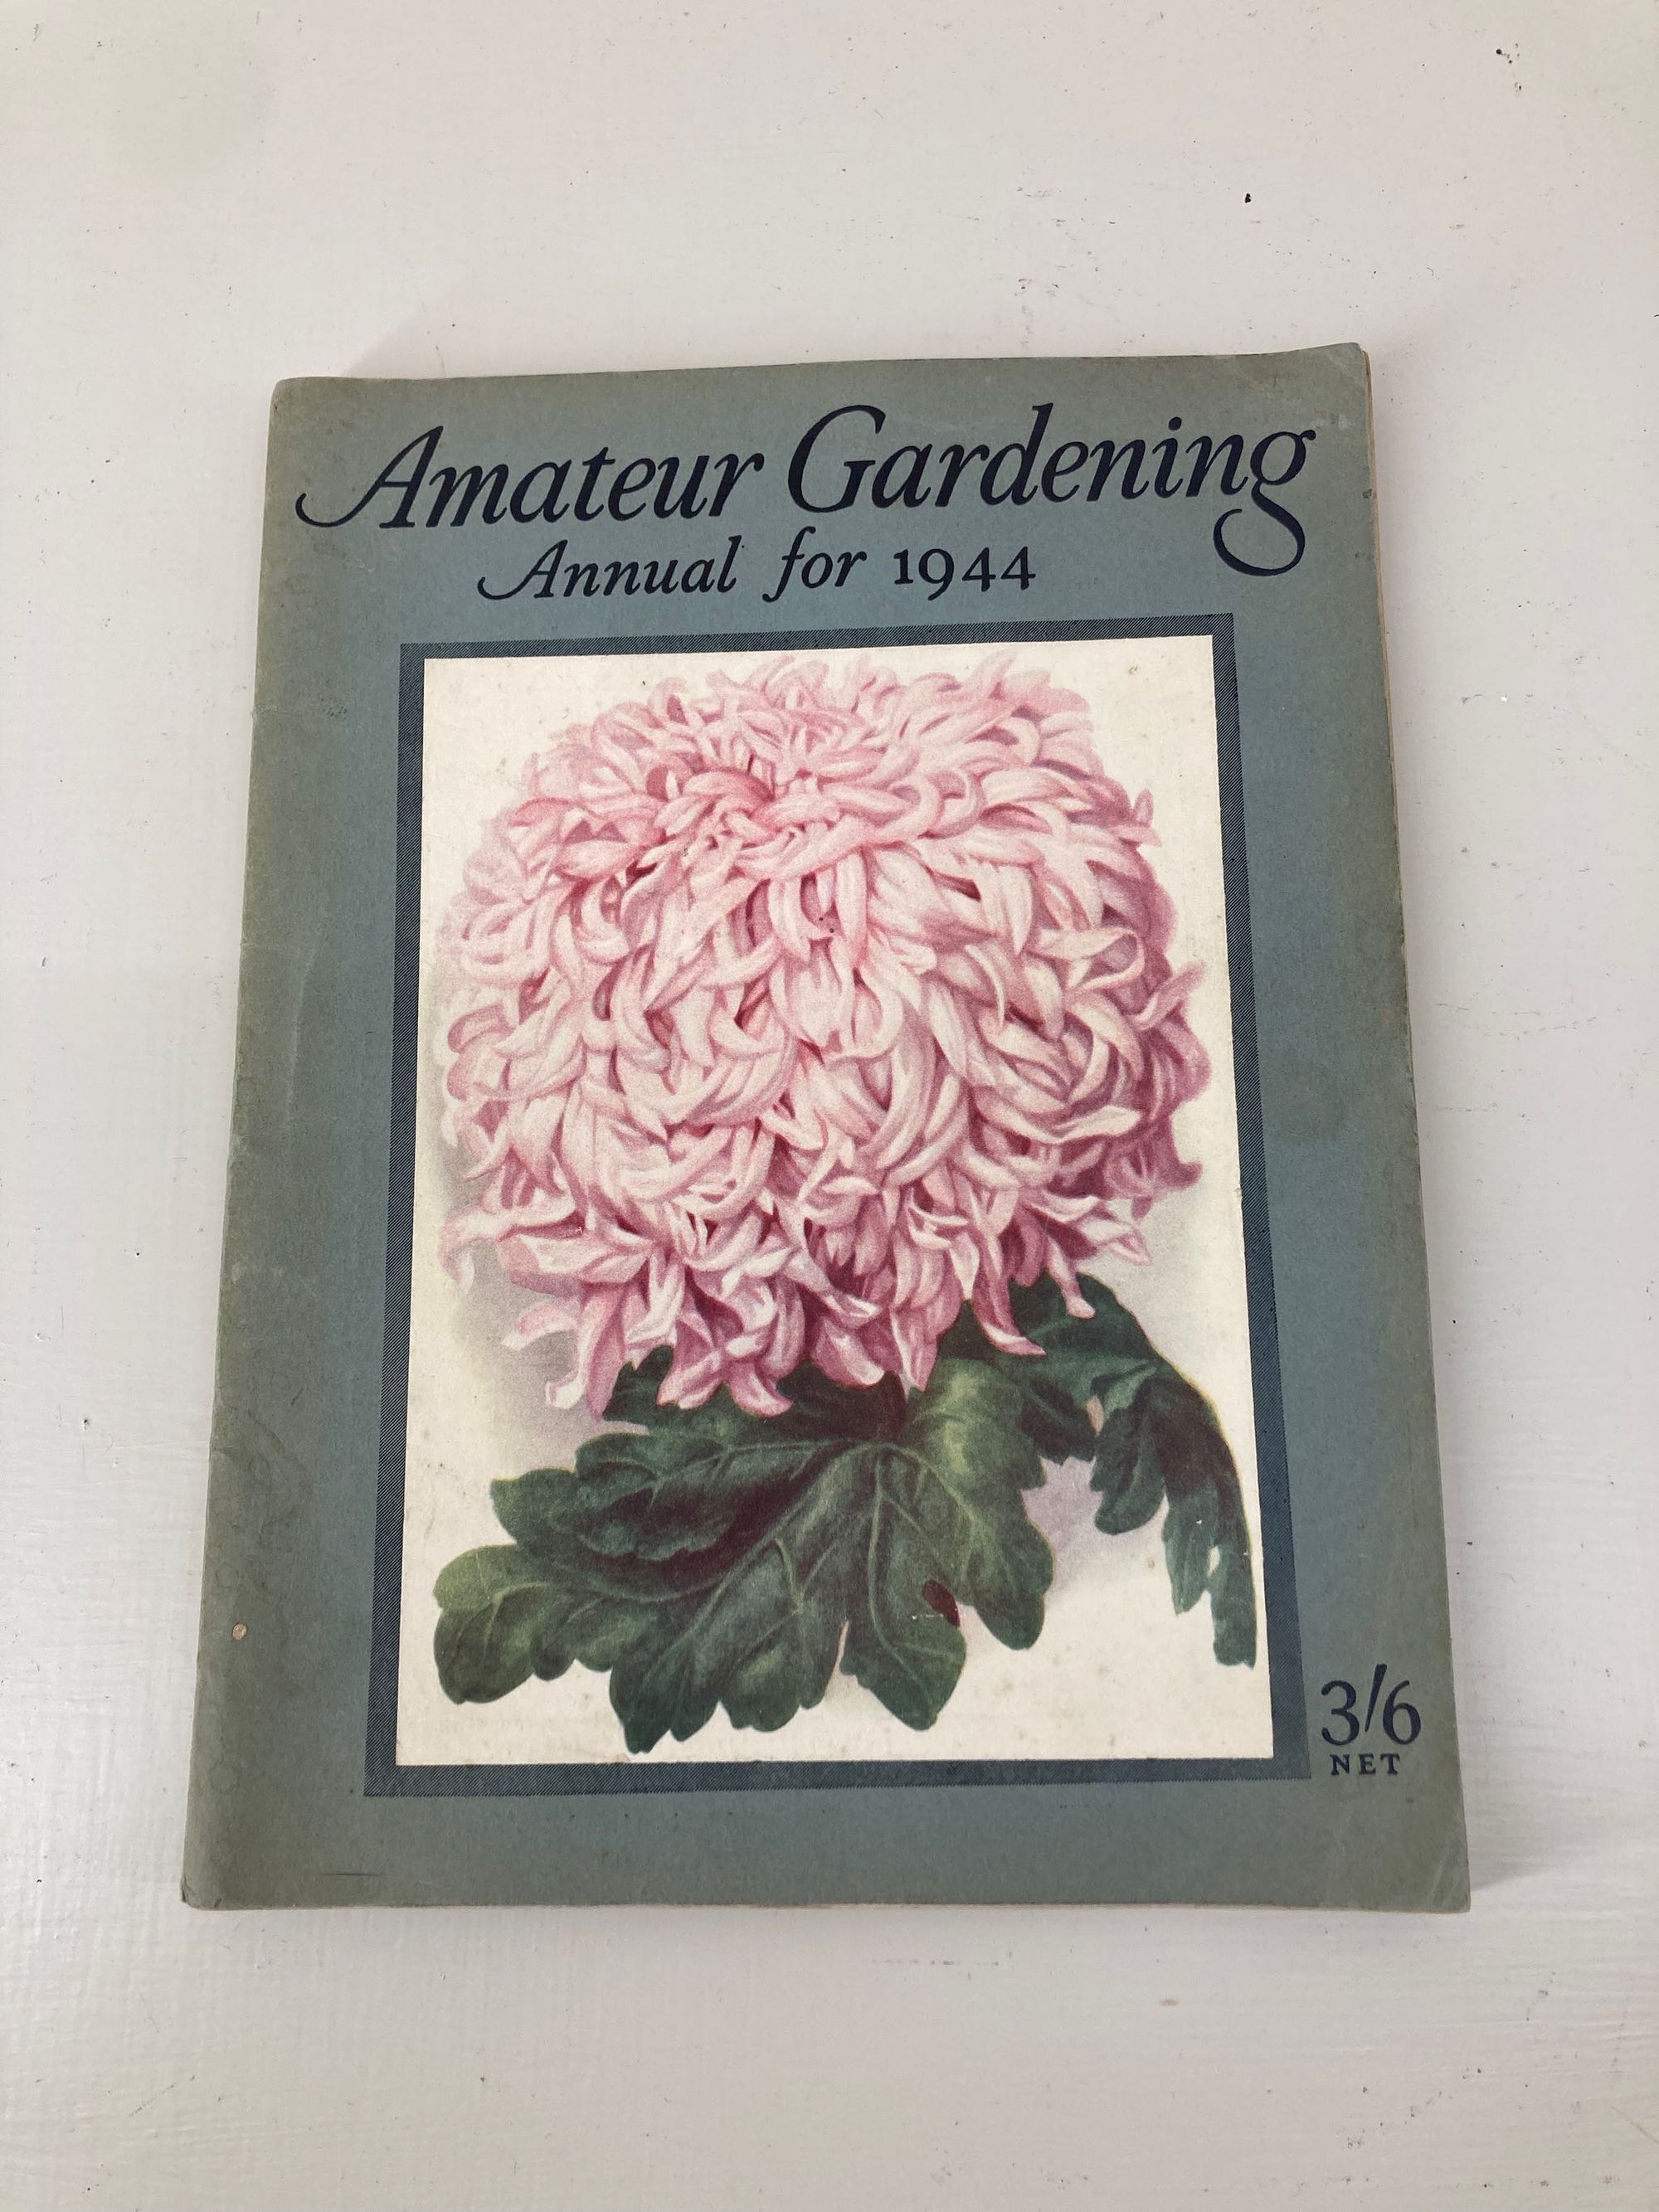 Amateur Gardening Annual for 1944